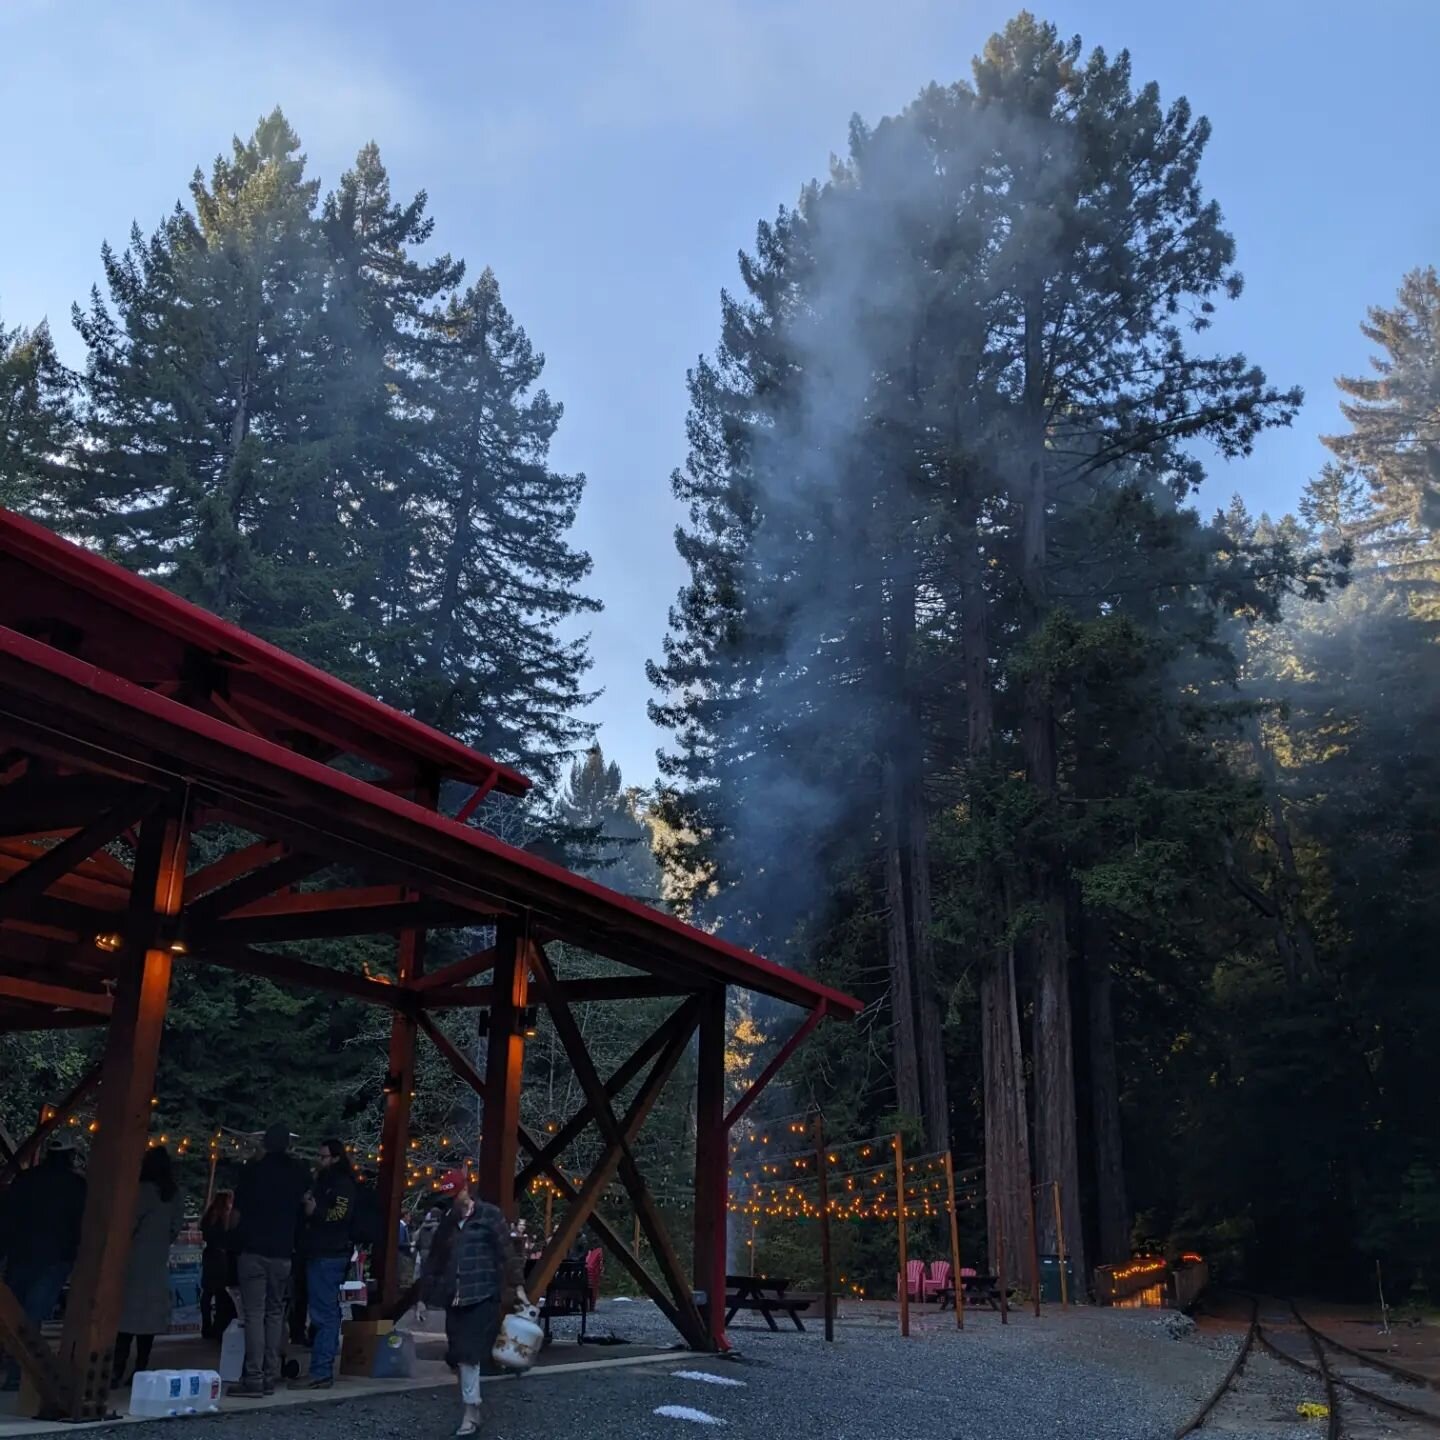 An absolutely gorgeous day in the redwoods for our Mushroom Train fundraiser. Thank you to everyone who made this day a success: our volunteers, wineries, food preppers, whiskey pourers and people herders!
.
And especially to @visitmendocino @skunktr